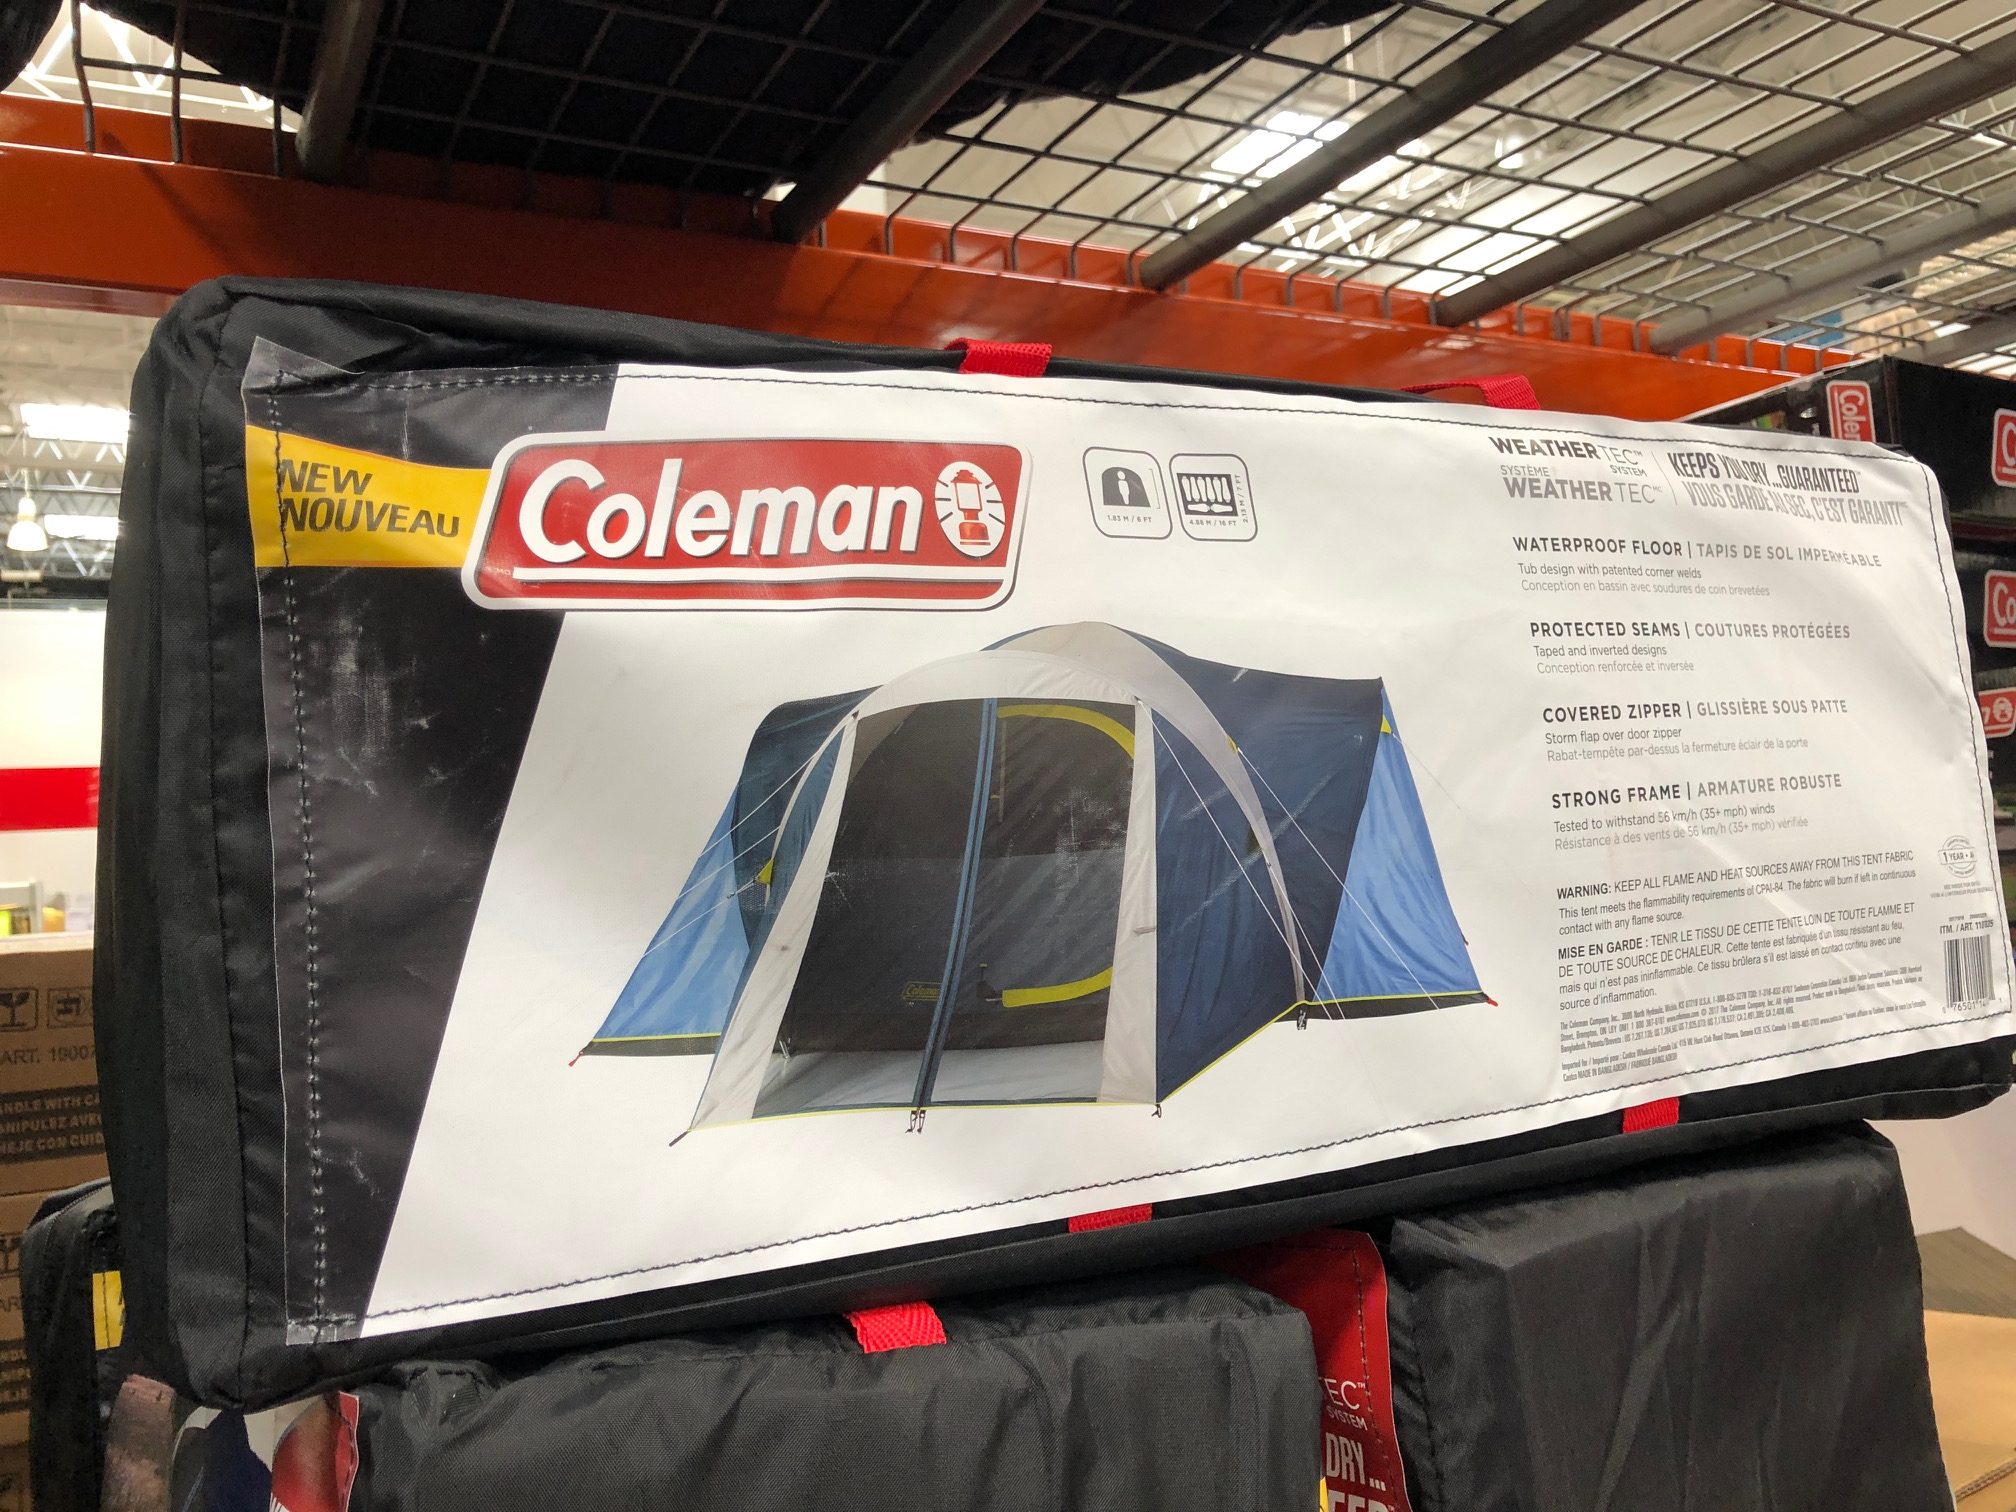 Camping Essentials available at Costco - My Family Stuff